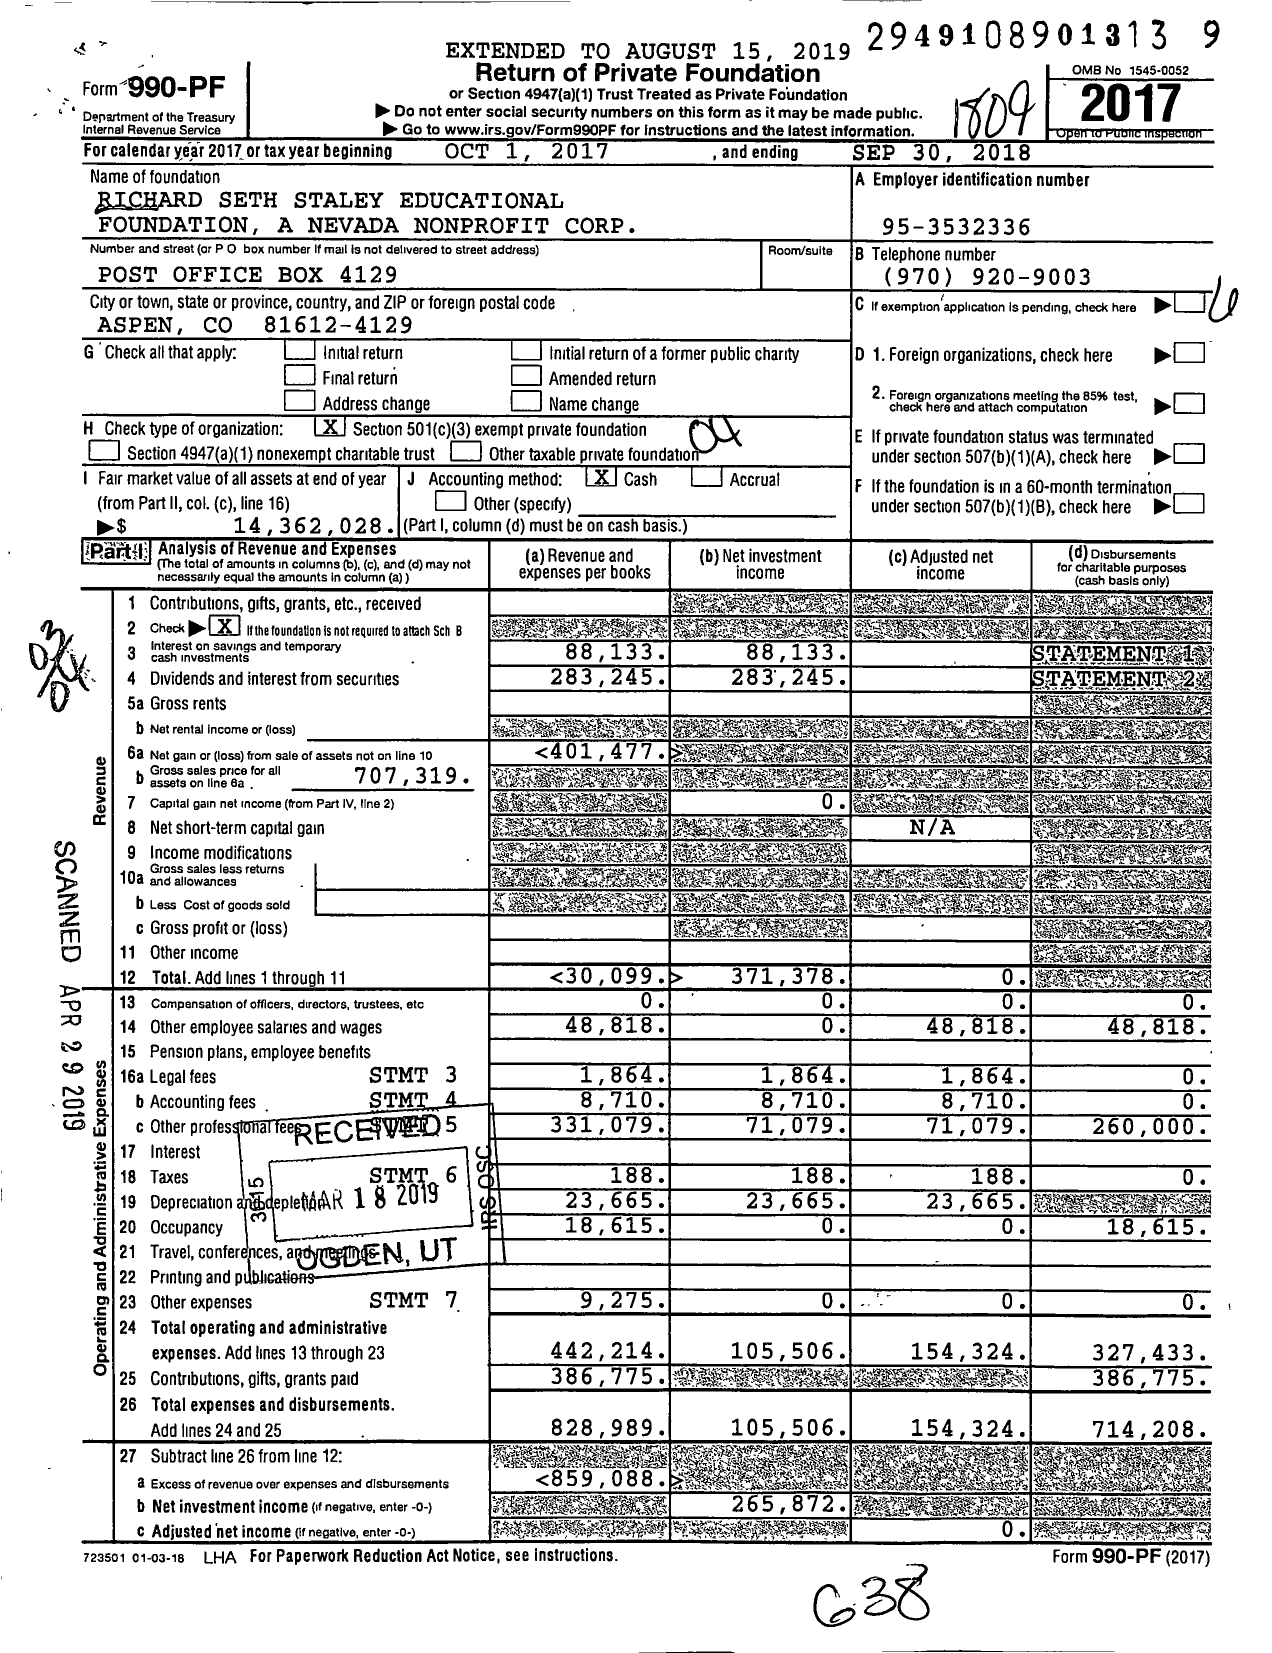 Image of first page of 2017 Form 990PF for Richard Seth Staley Educational Foundation A Nevada Nonprofit Corporation